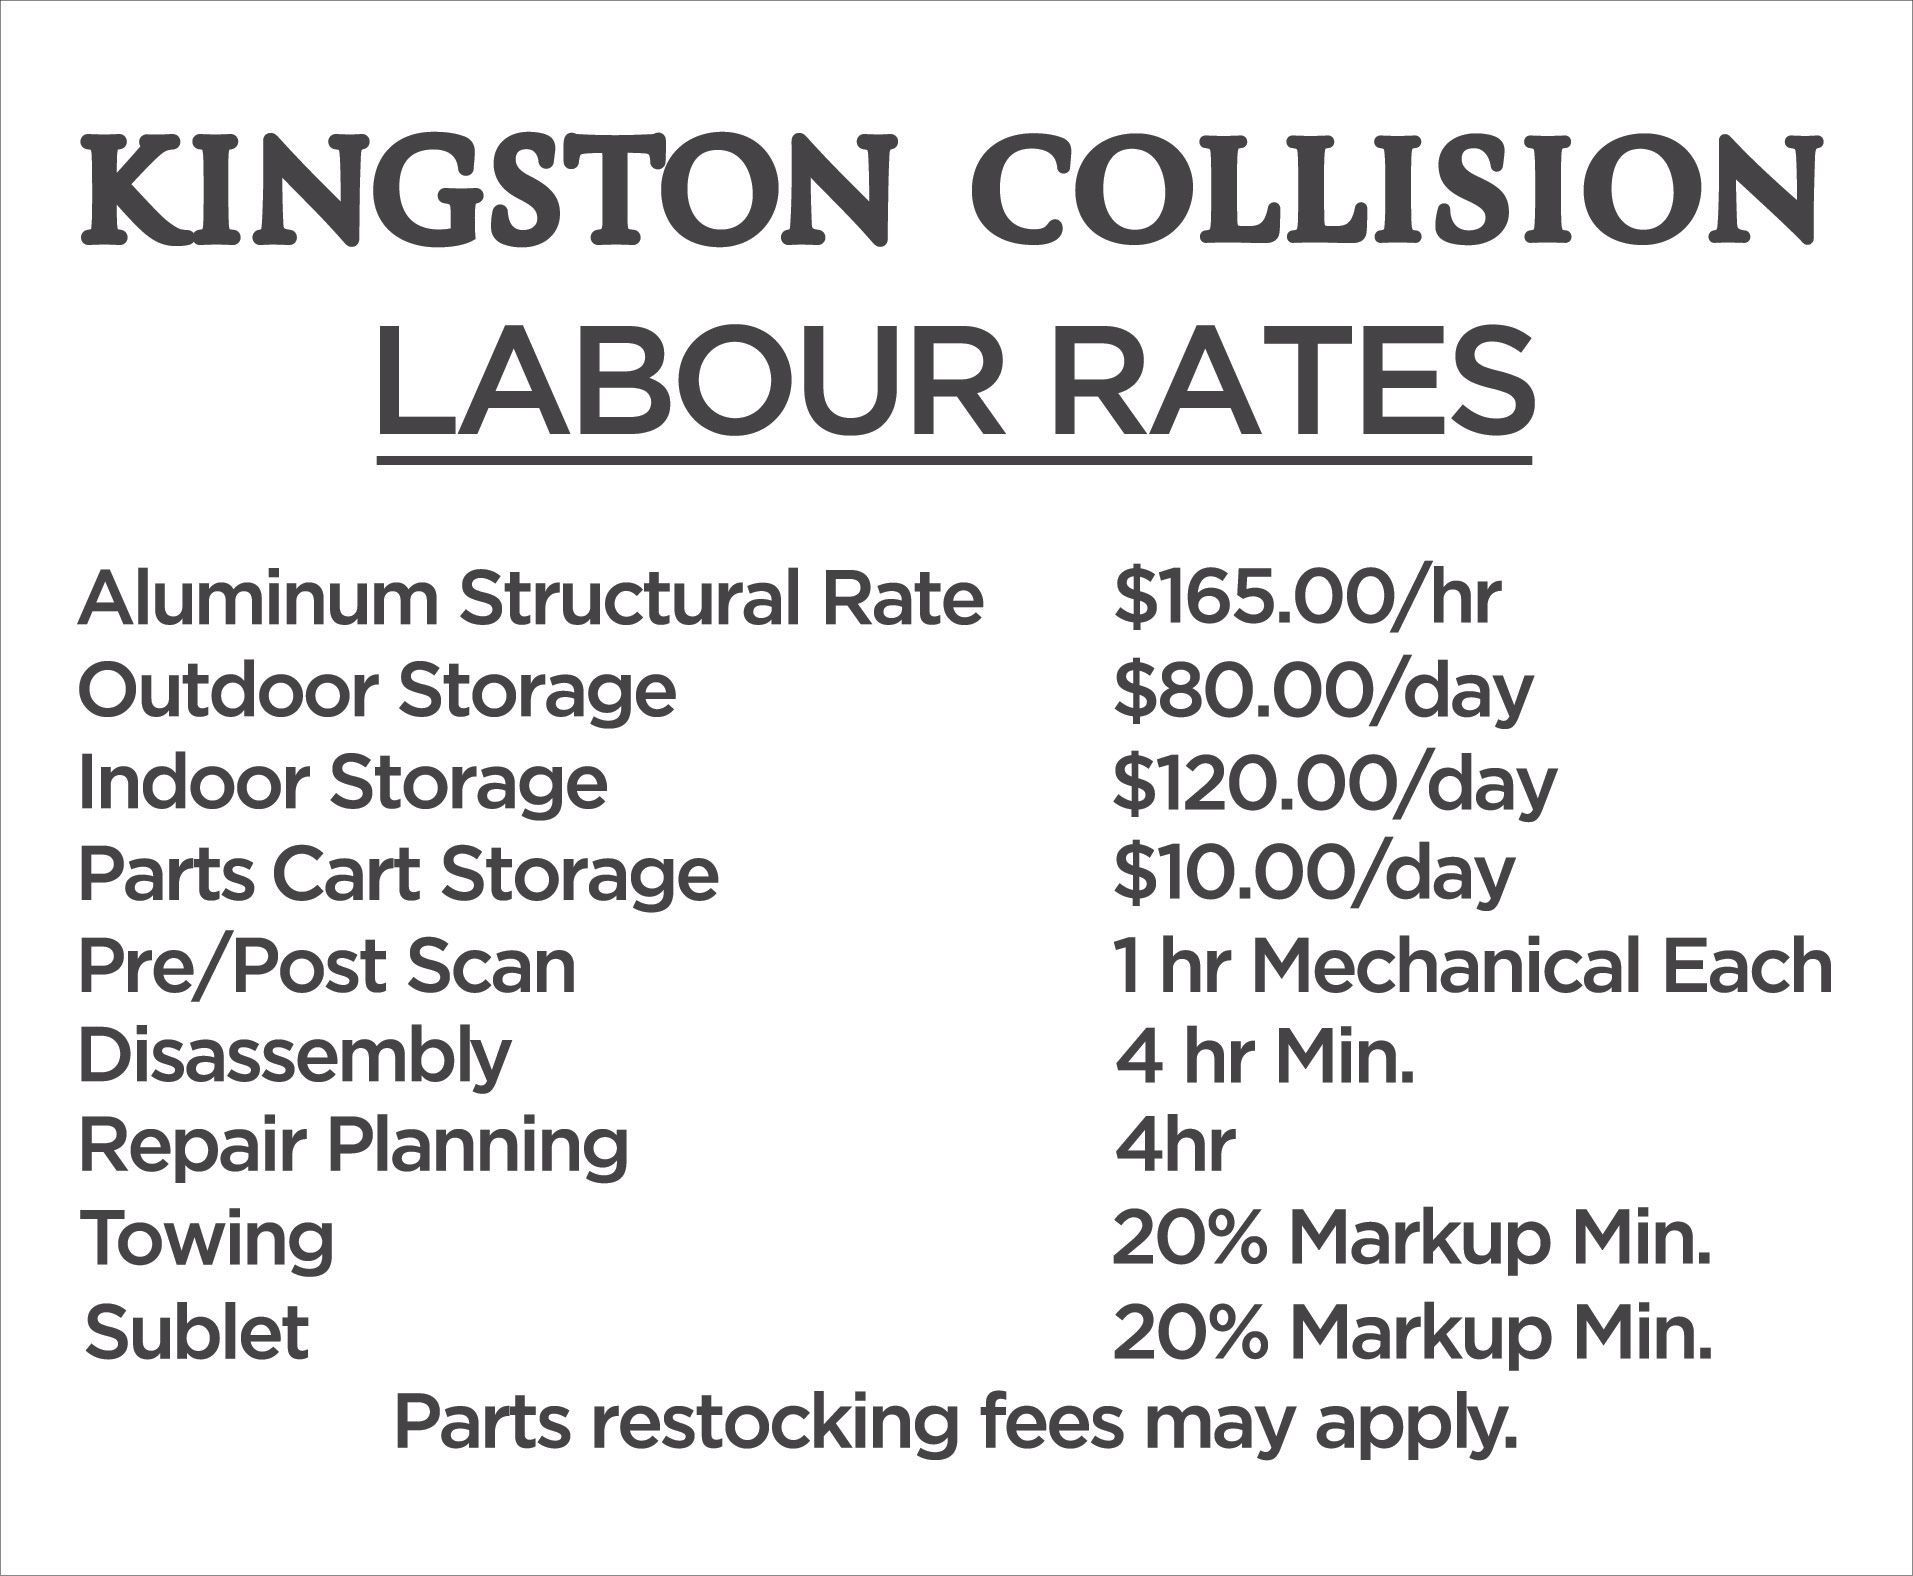 Kingston collision labour rates are listed on a white background.